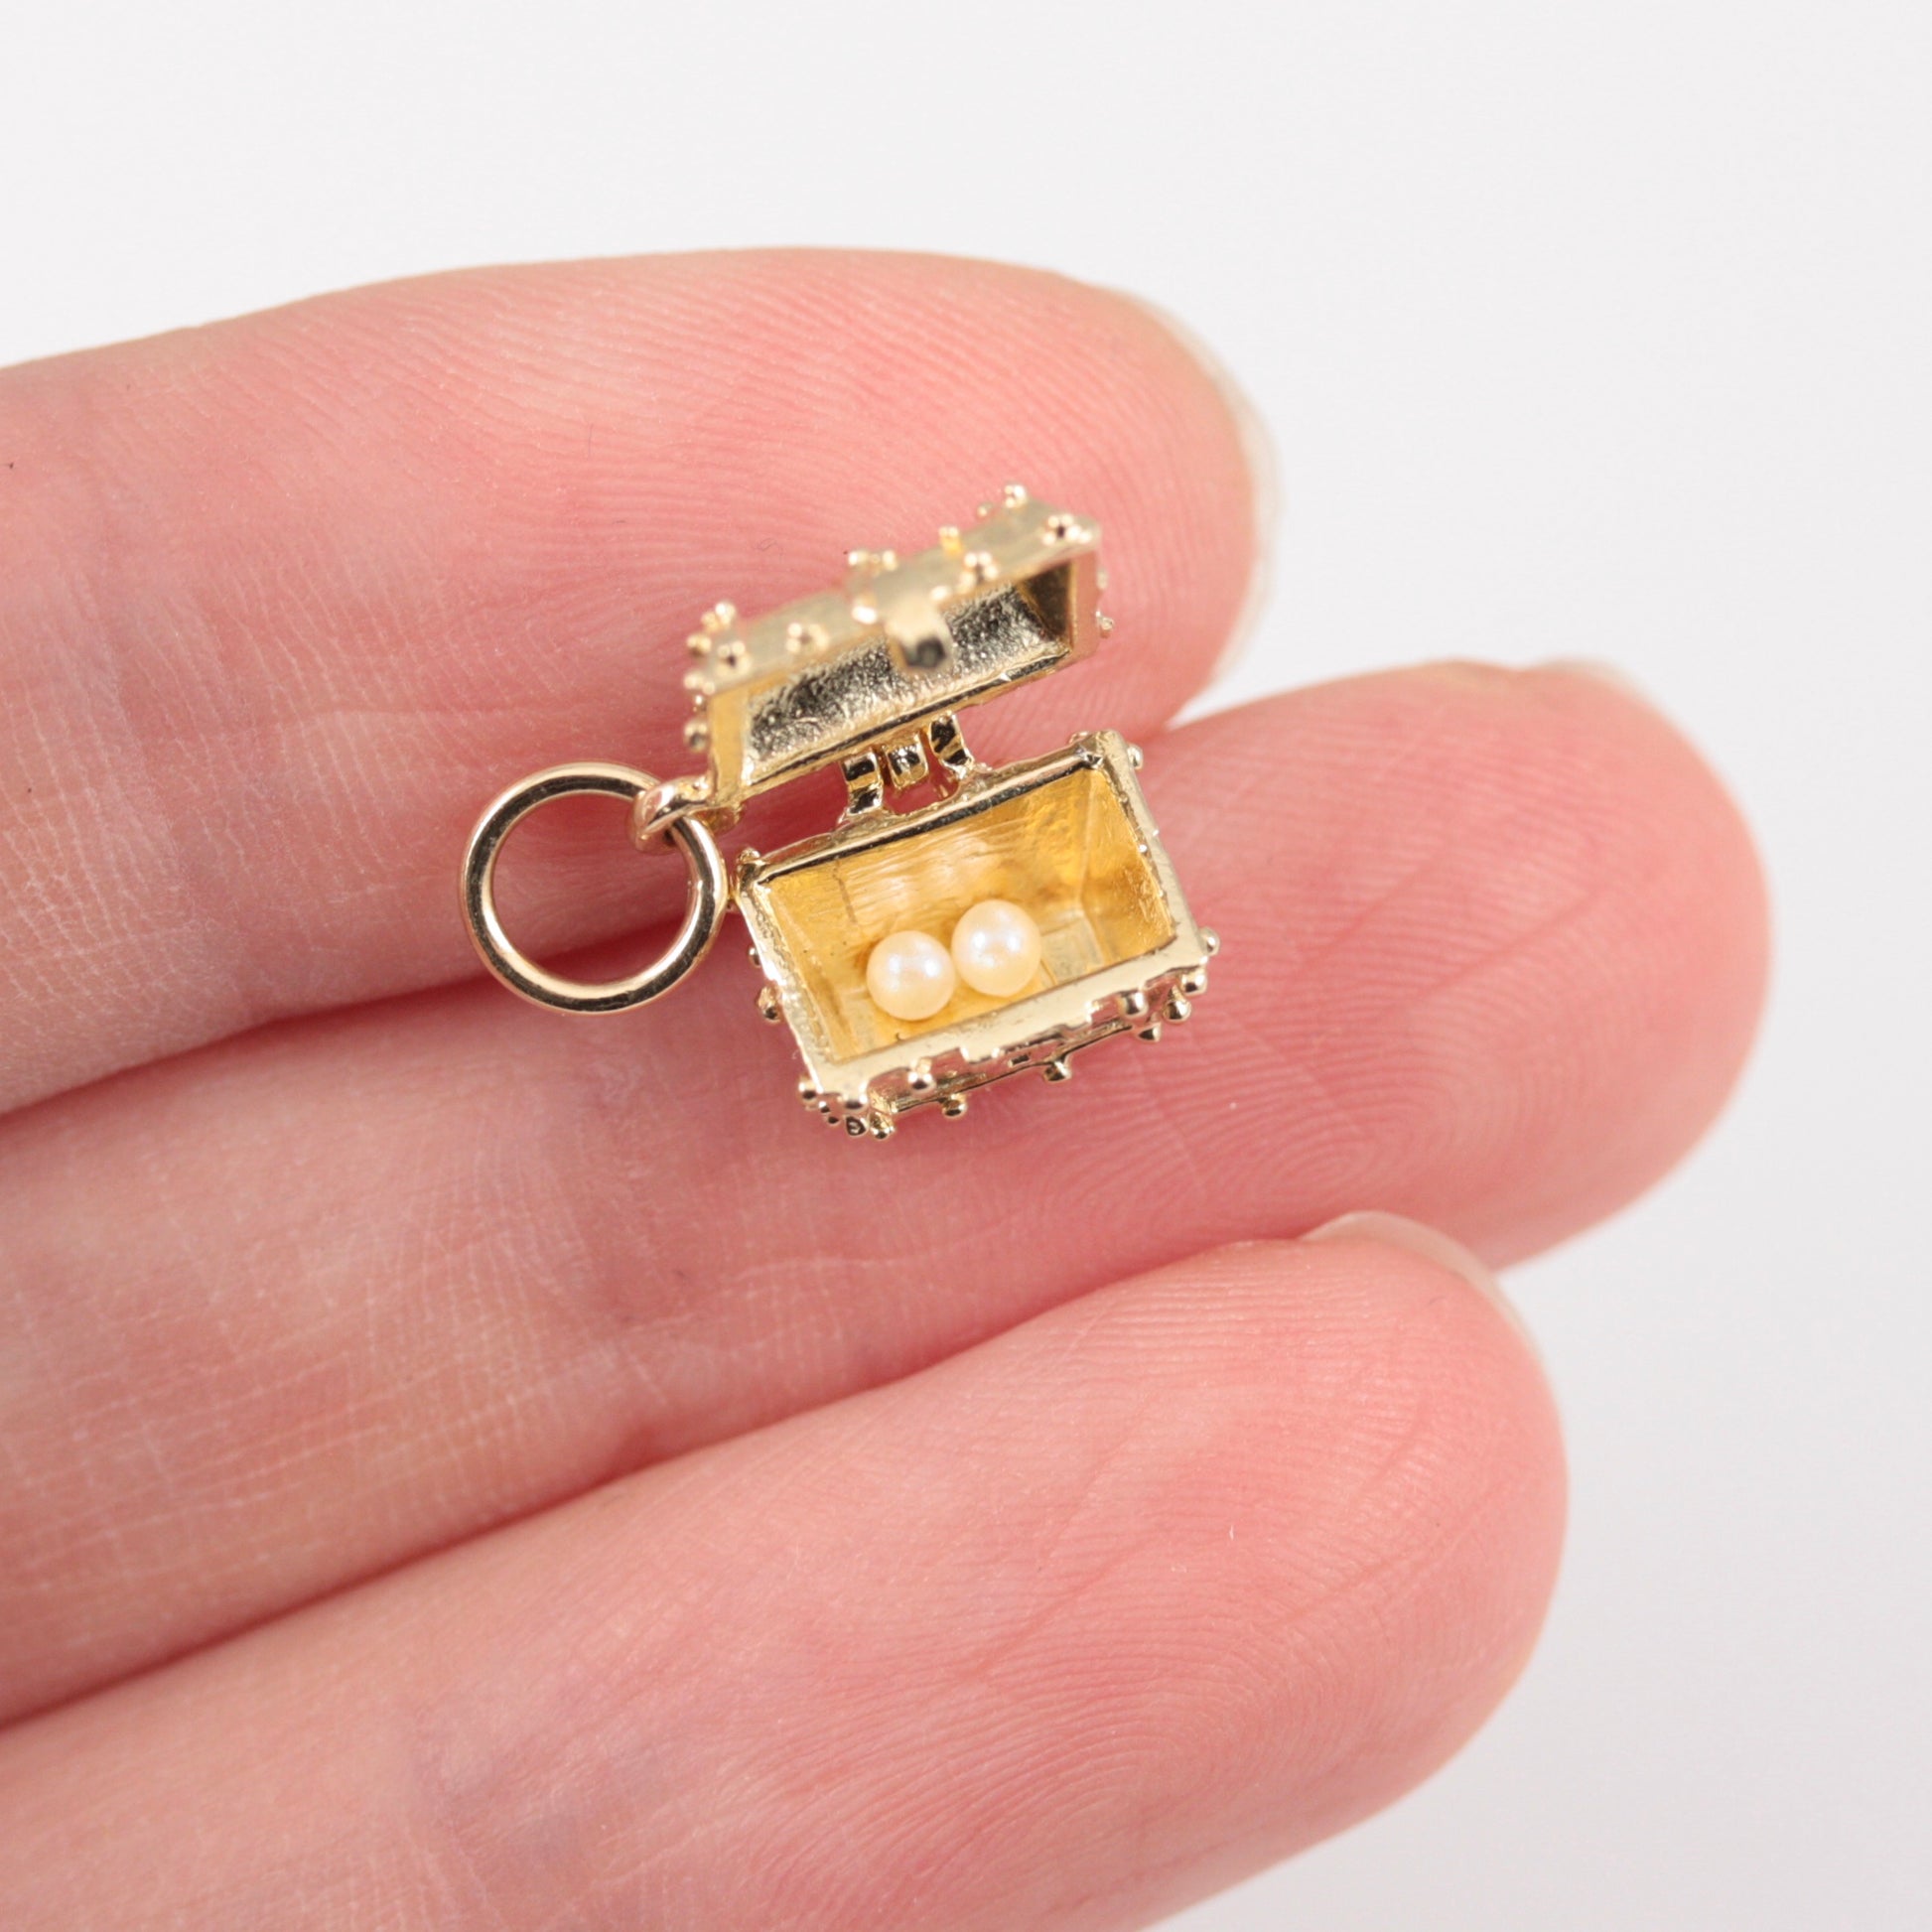 vintage 9ct gold treasure chest charm with pearls inside